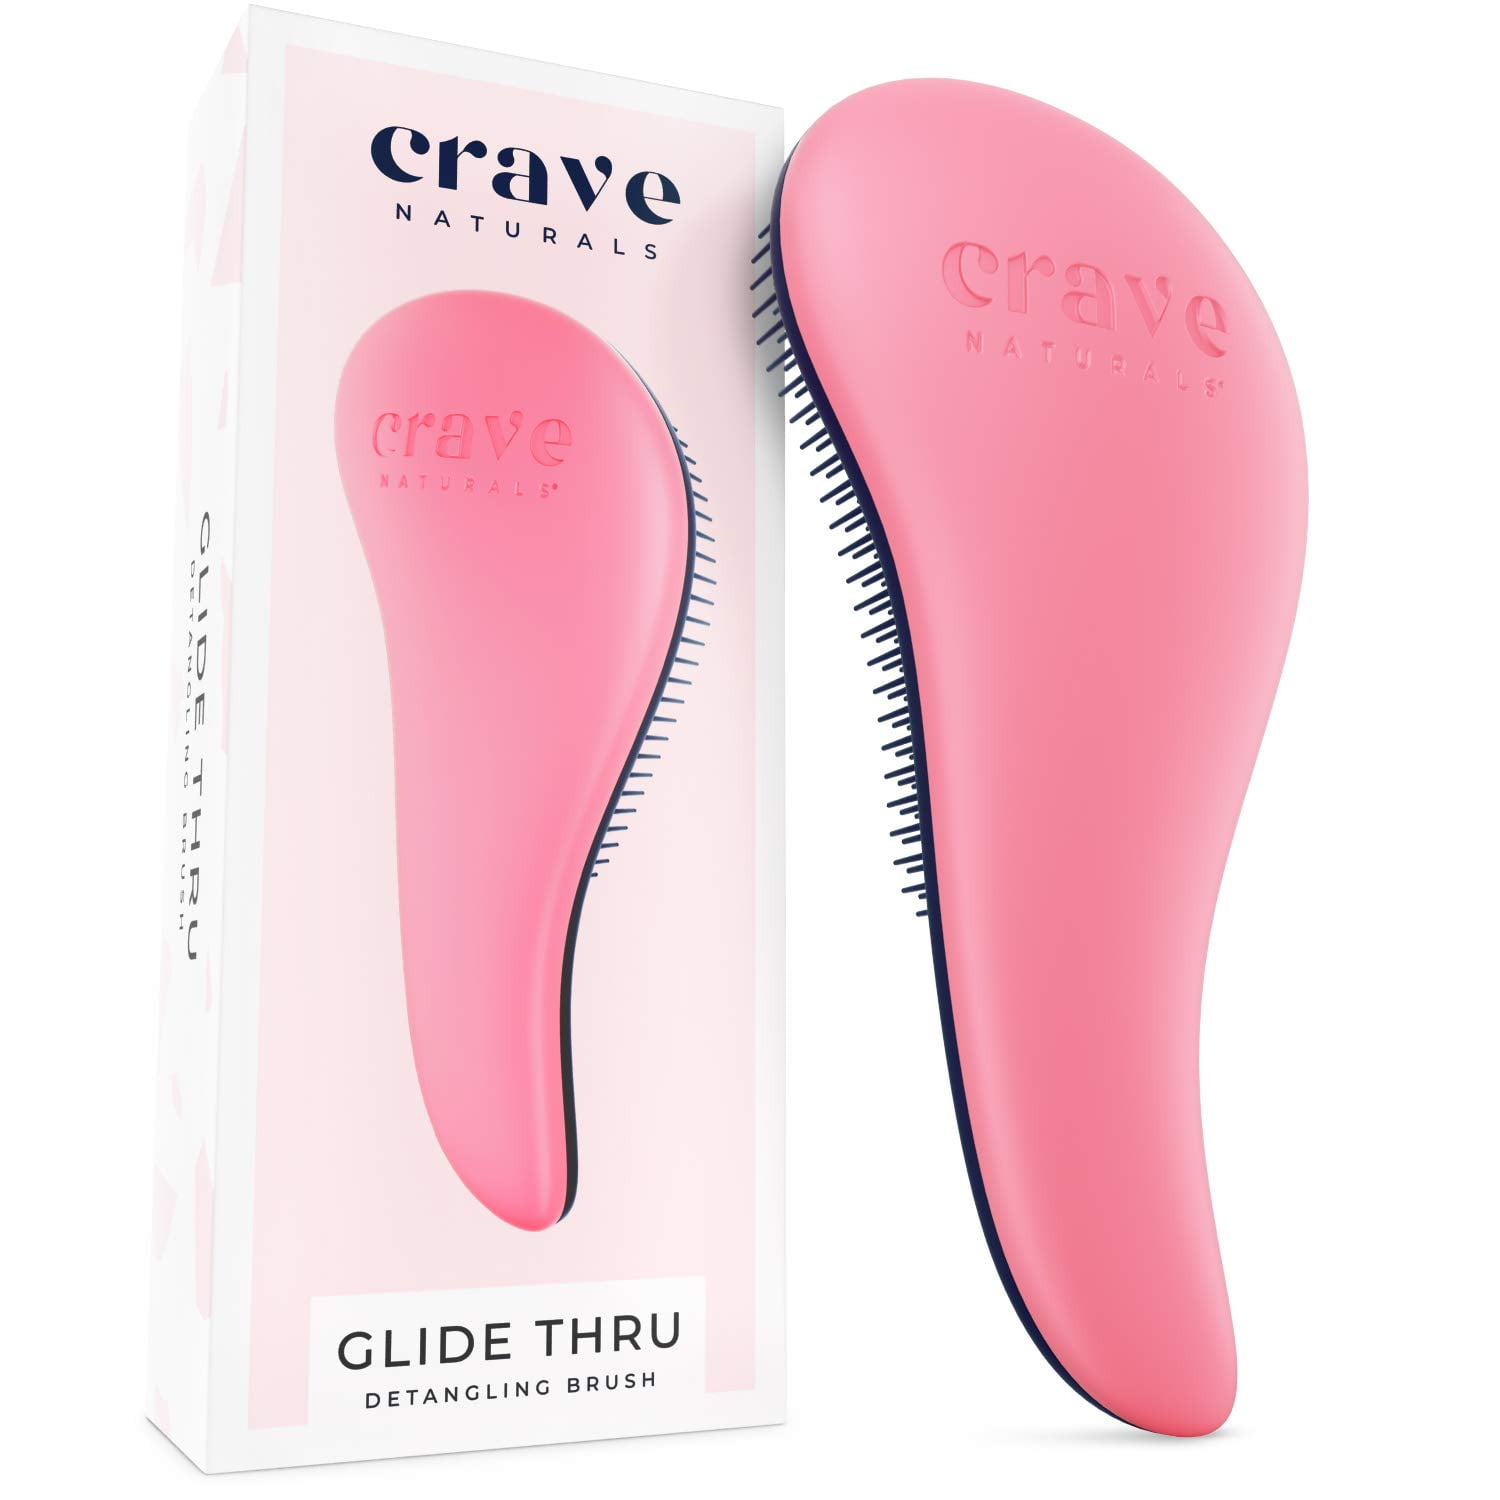 Crave Naturals Glide Thru Detangling Brush for Adults & Kids Hair -  Detangler Hair Brush for Natural, Curly, Straight, Wet or Dry Hair (PINK).  